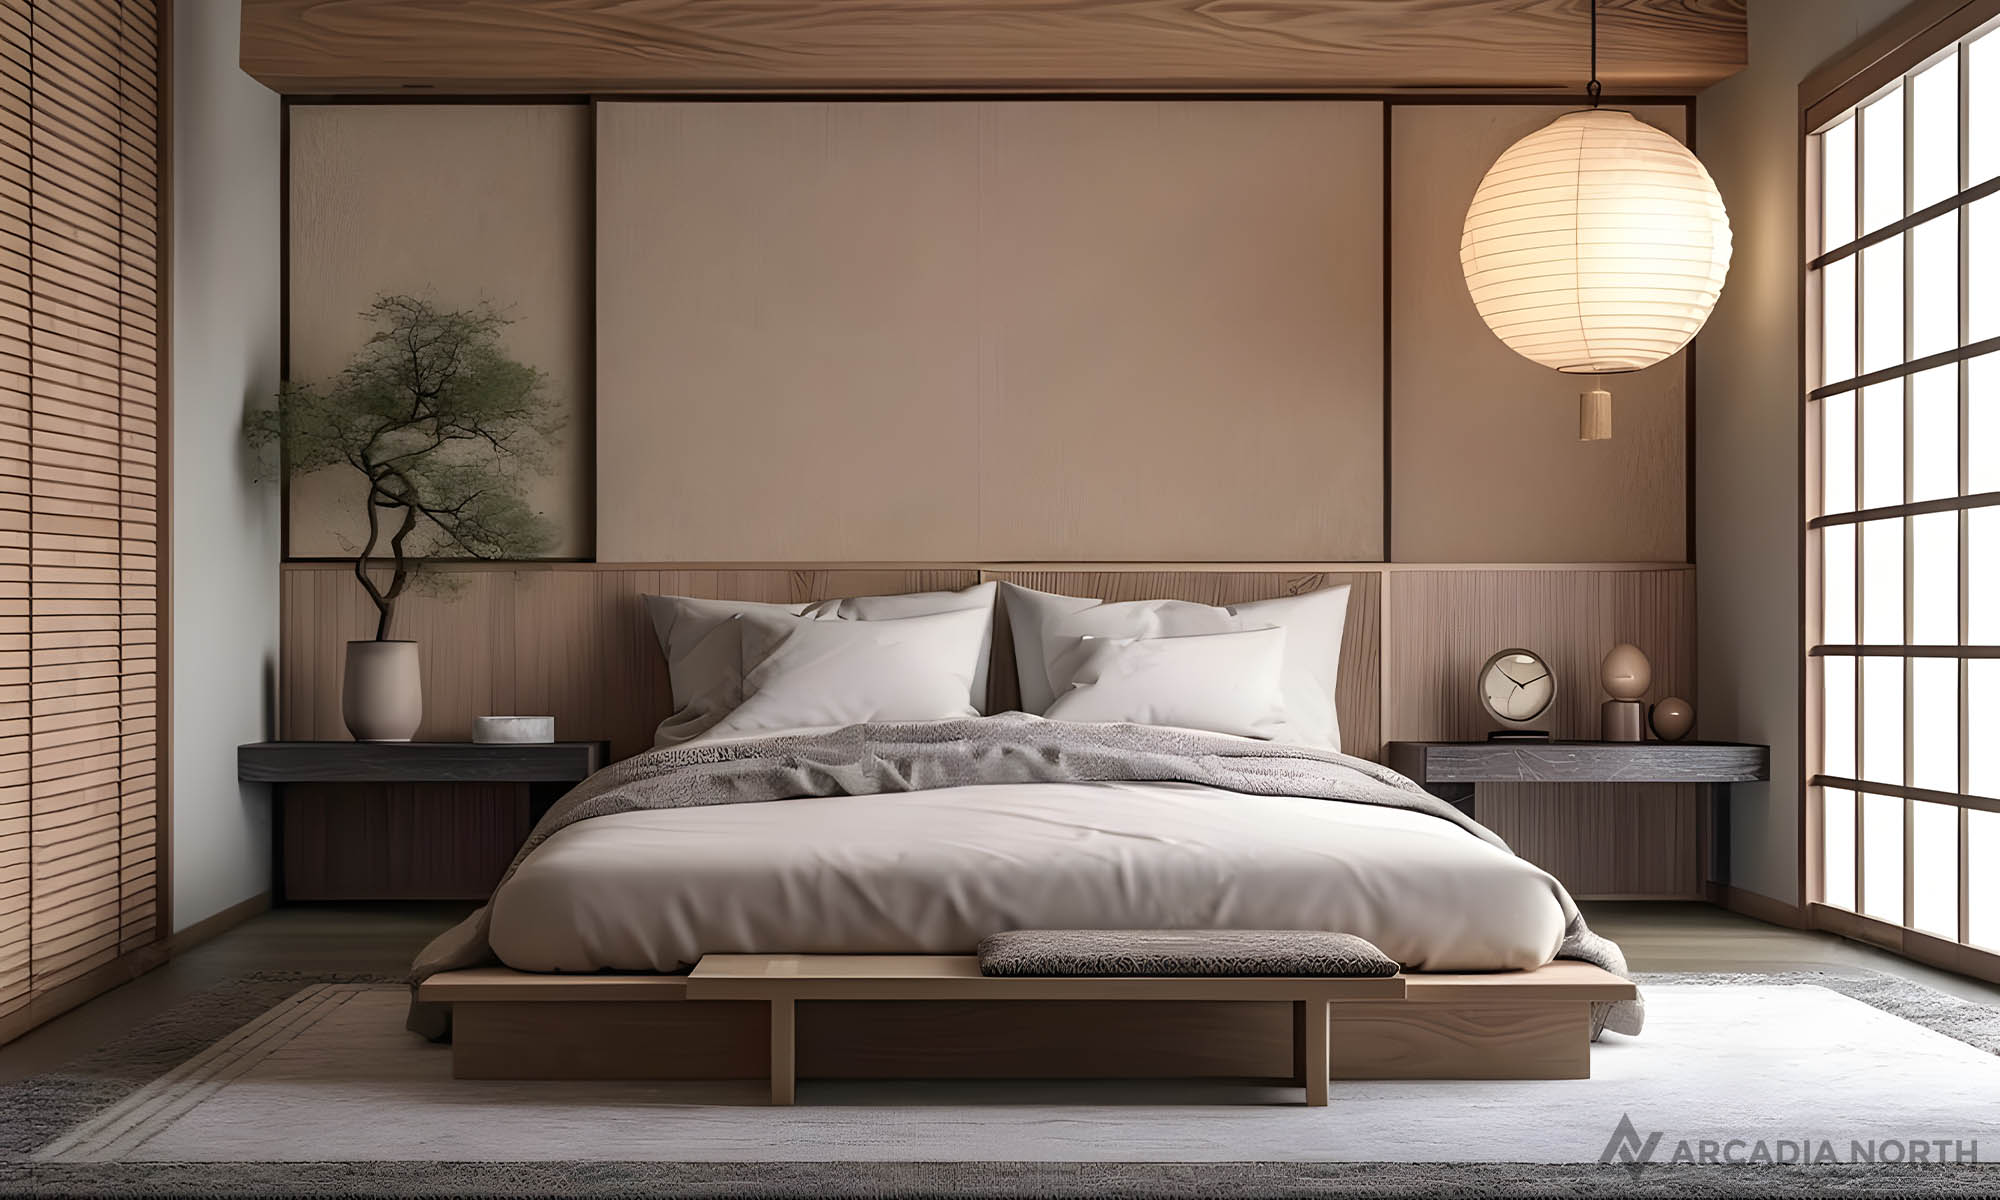 Modern Japanese bedroom with an empty wall above the bed